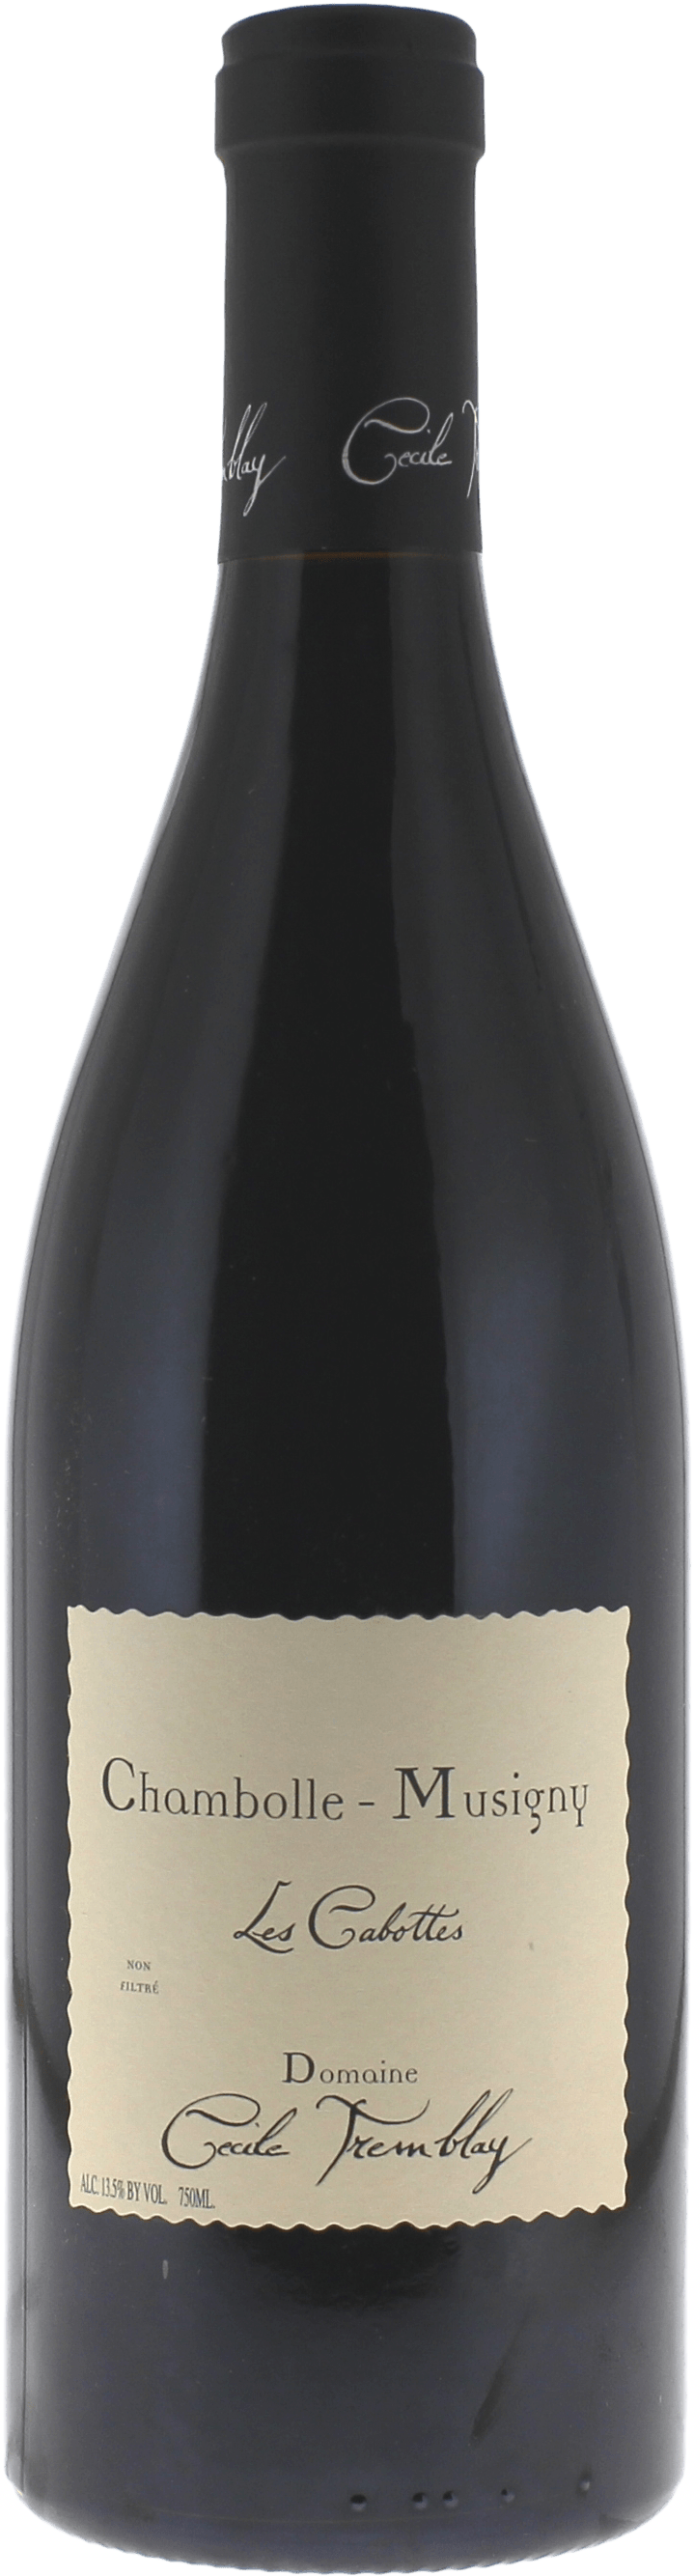 Chambolle musigny les cabottes 2011 Domaine TREMBLAY Cecile, Bourgogne rouge